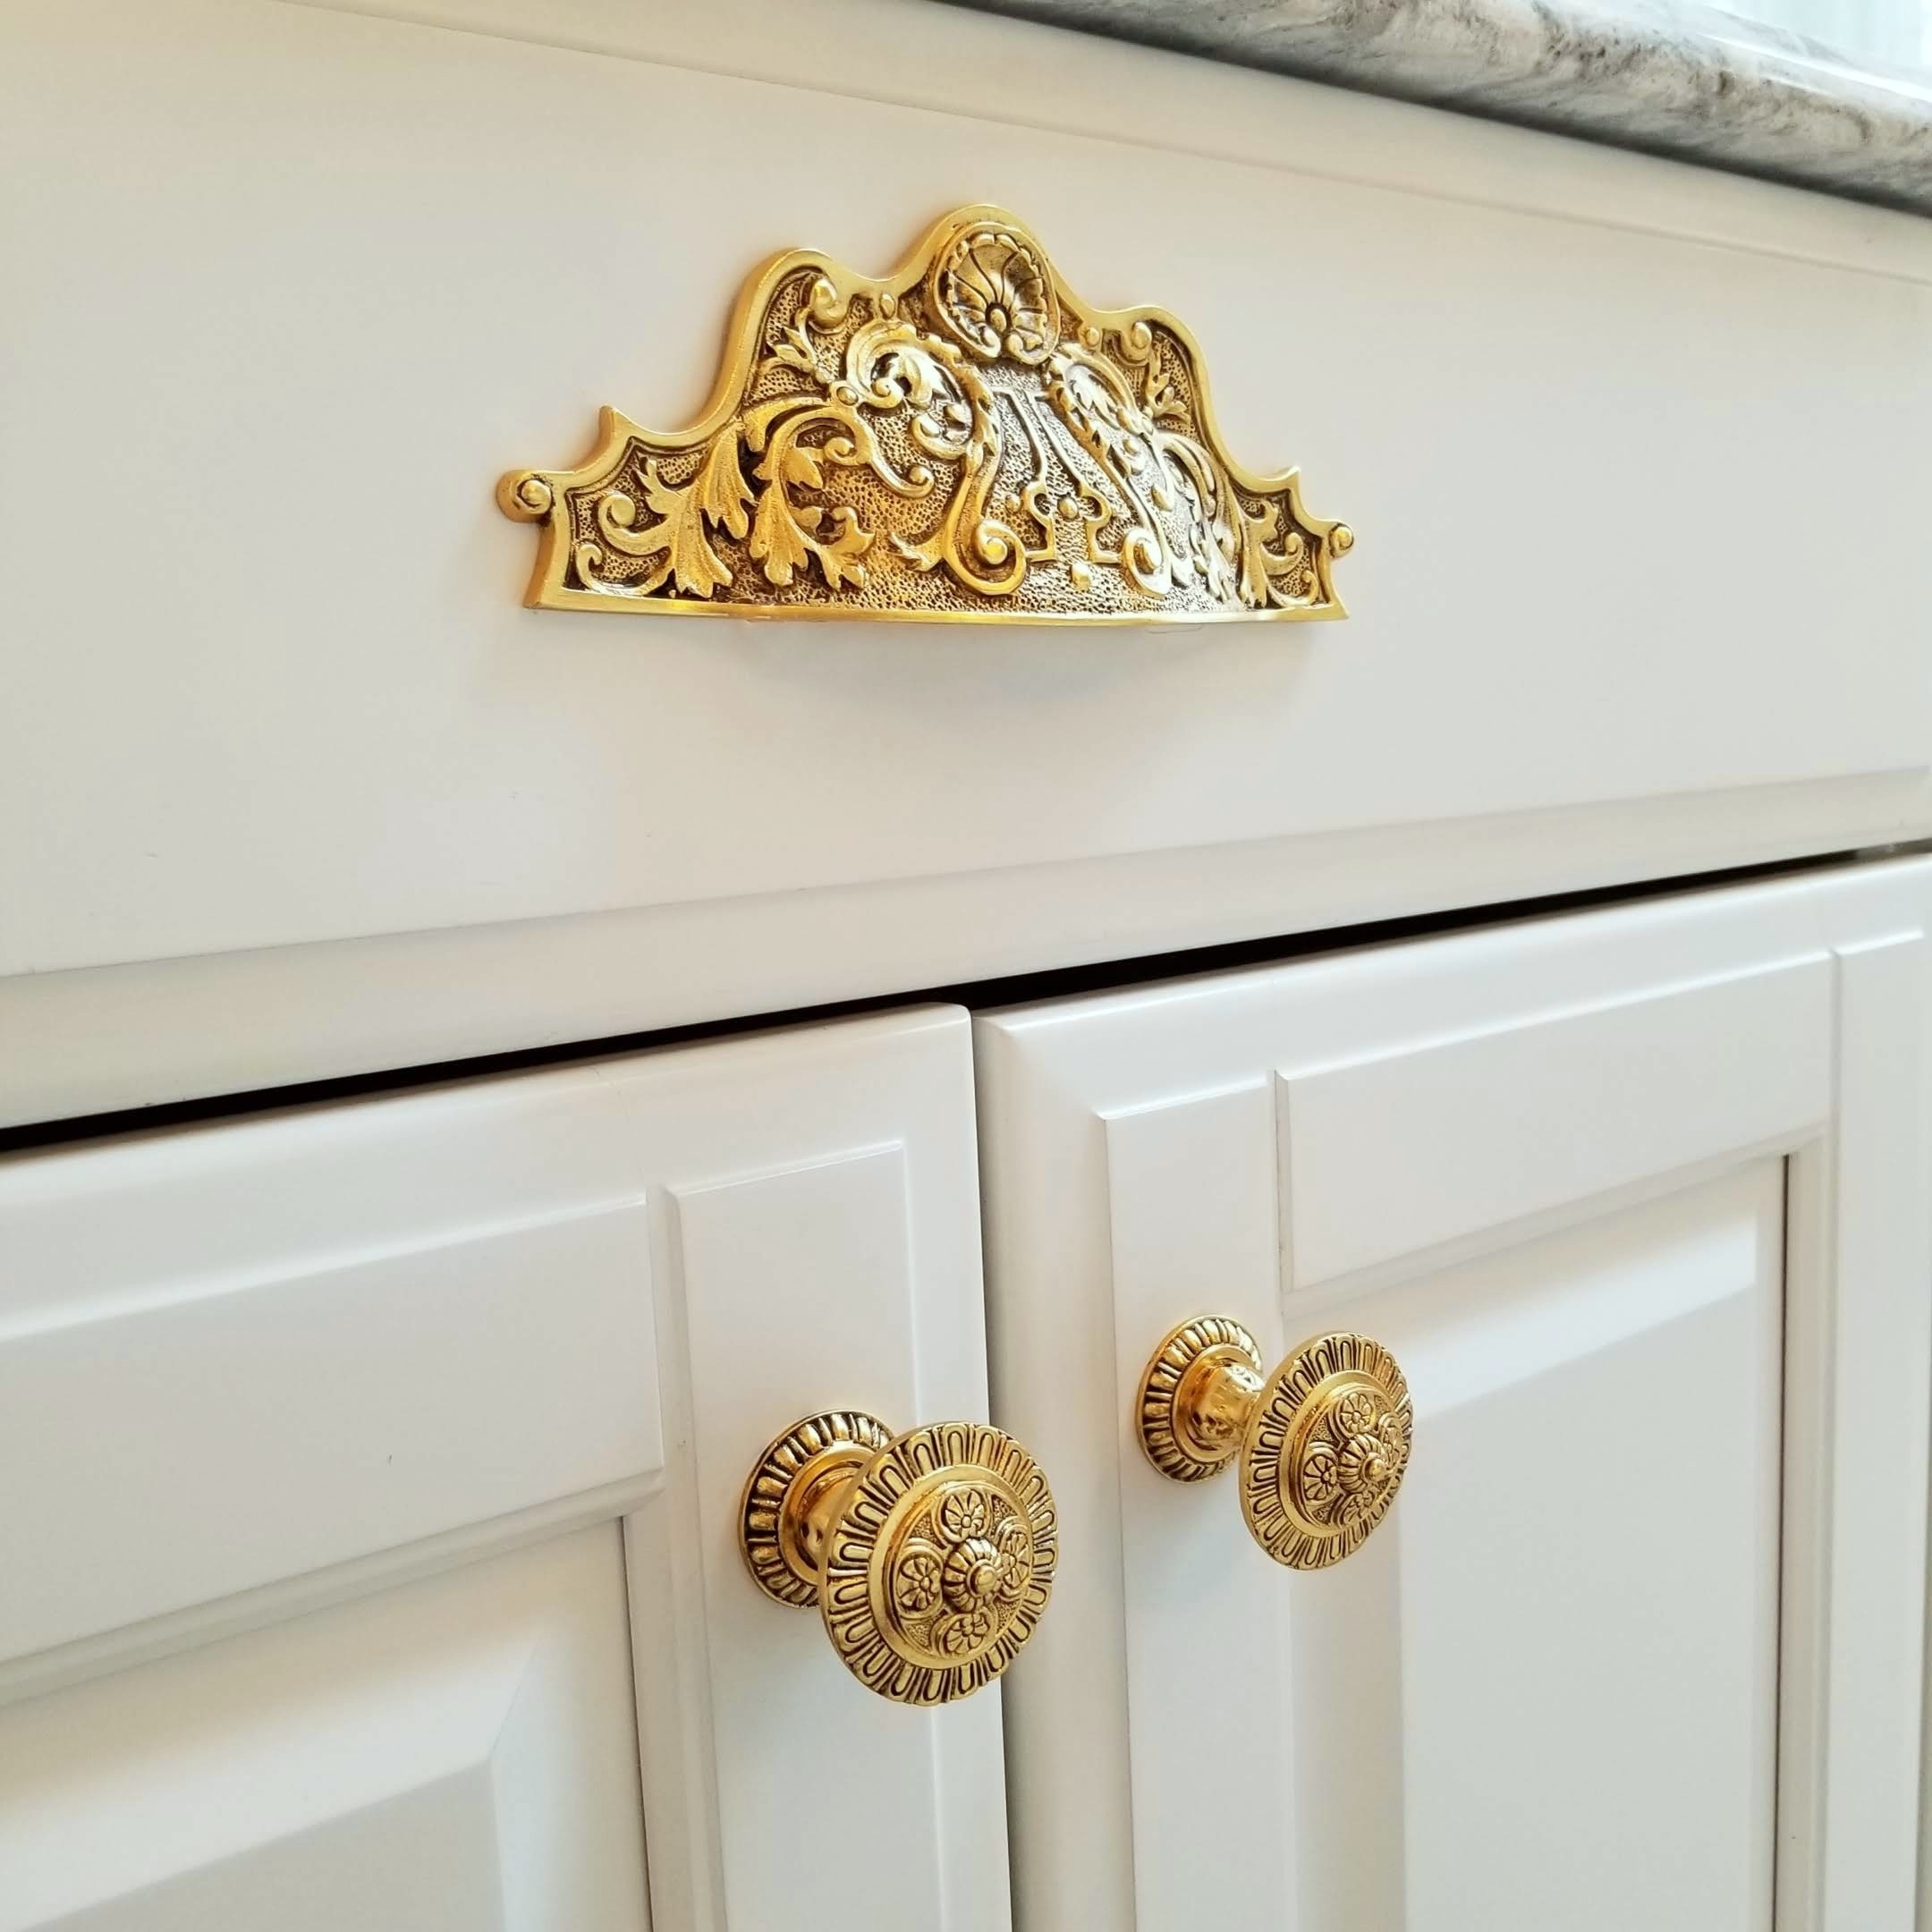 Kensington bin pull and knobs and back plates in 24K gold finish.jpg